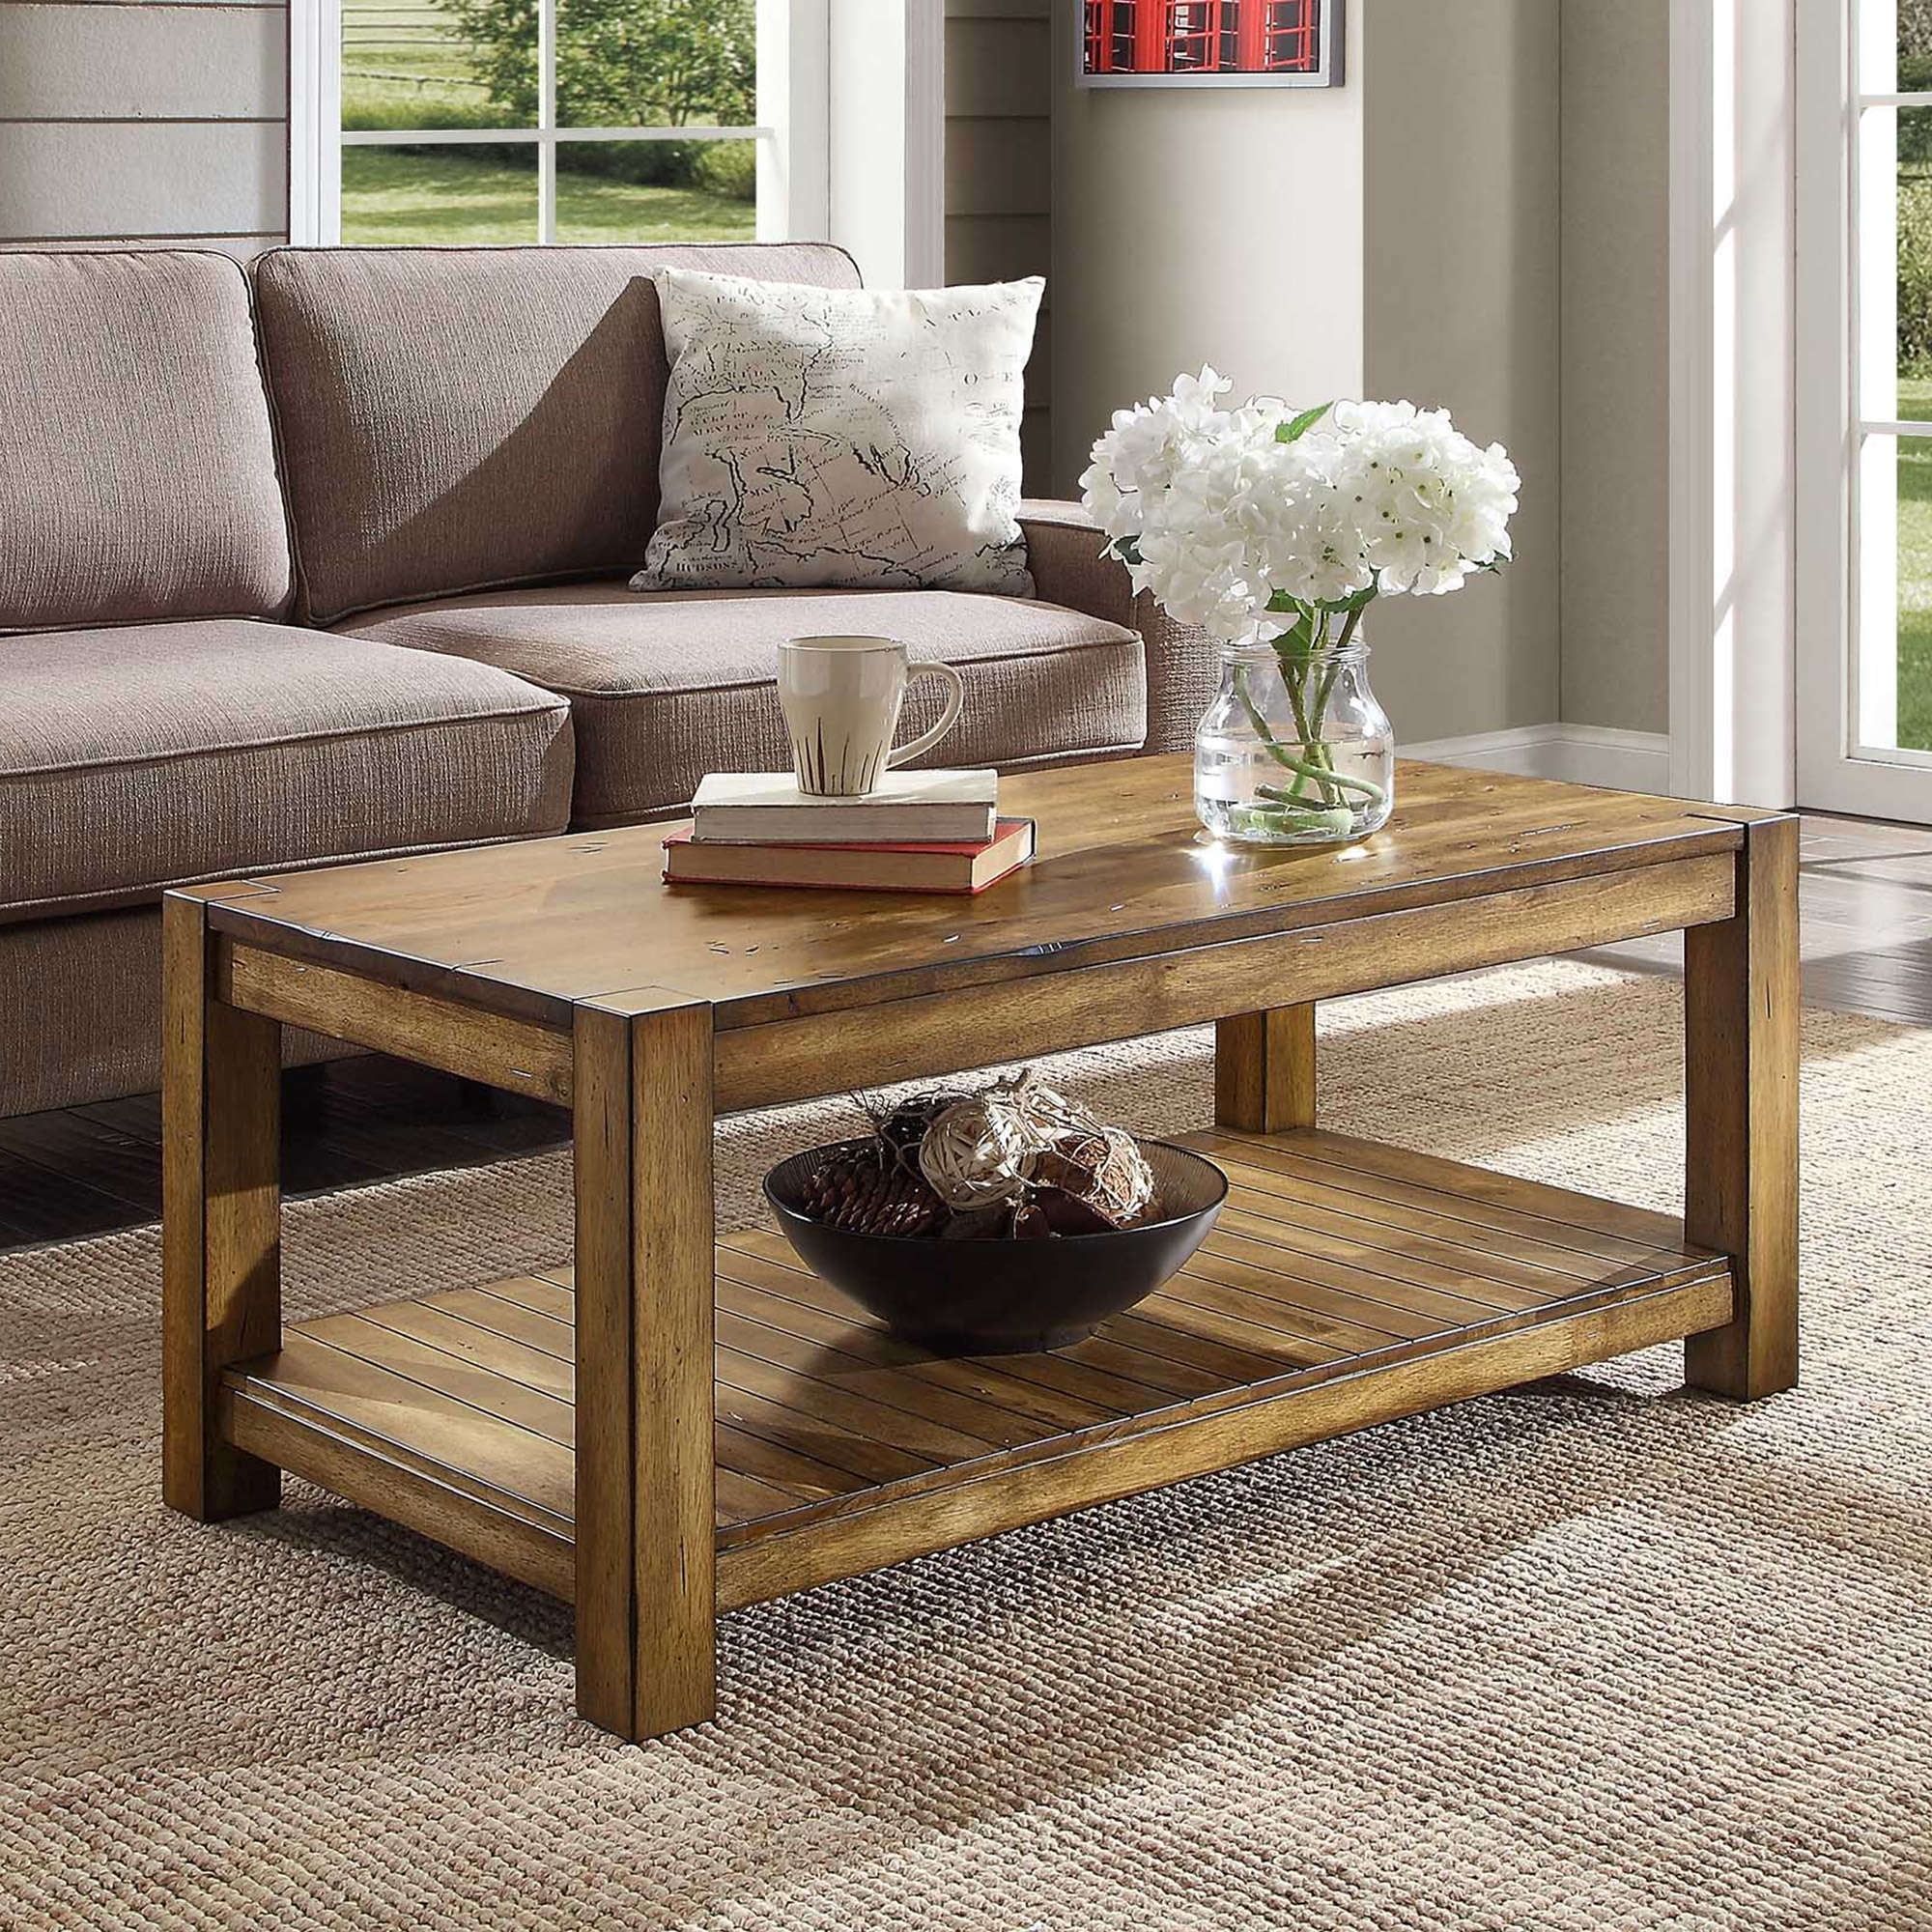 Bryant Solid Wood Coffee Table, Rustic Maple Brown Finish – Walmart Pertaining To Pemberly Row Replicated Wood Coffee Tables (View 12 of 15)